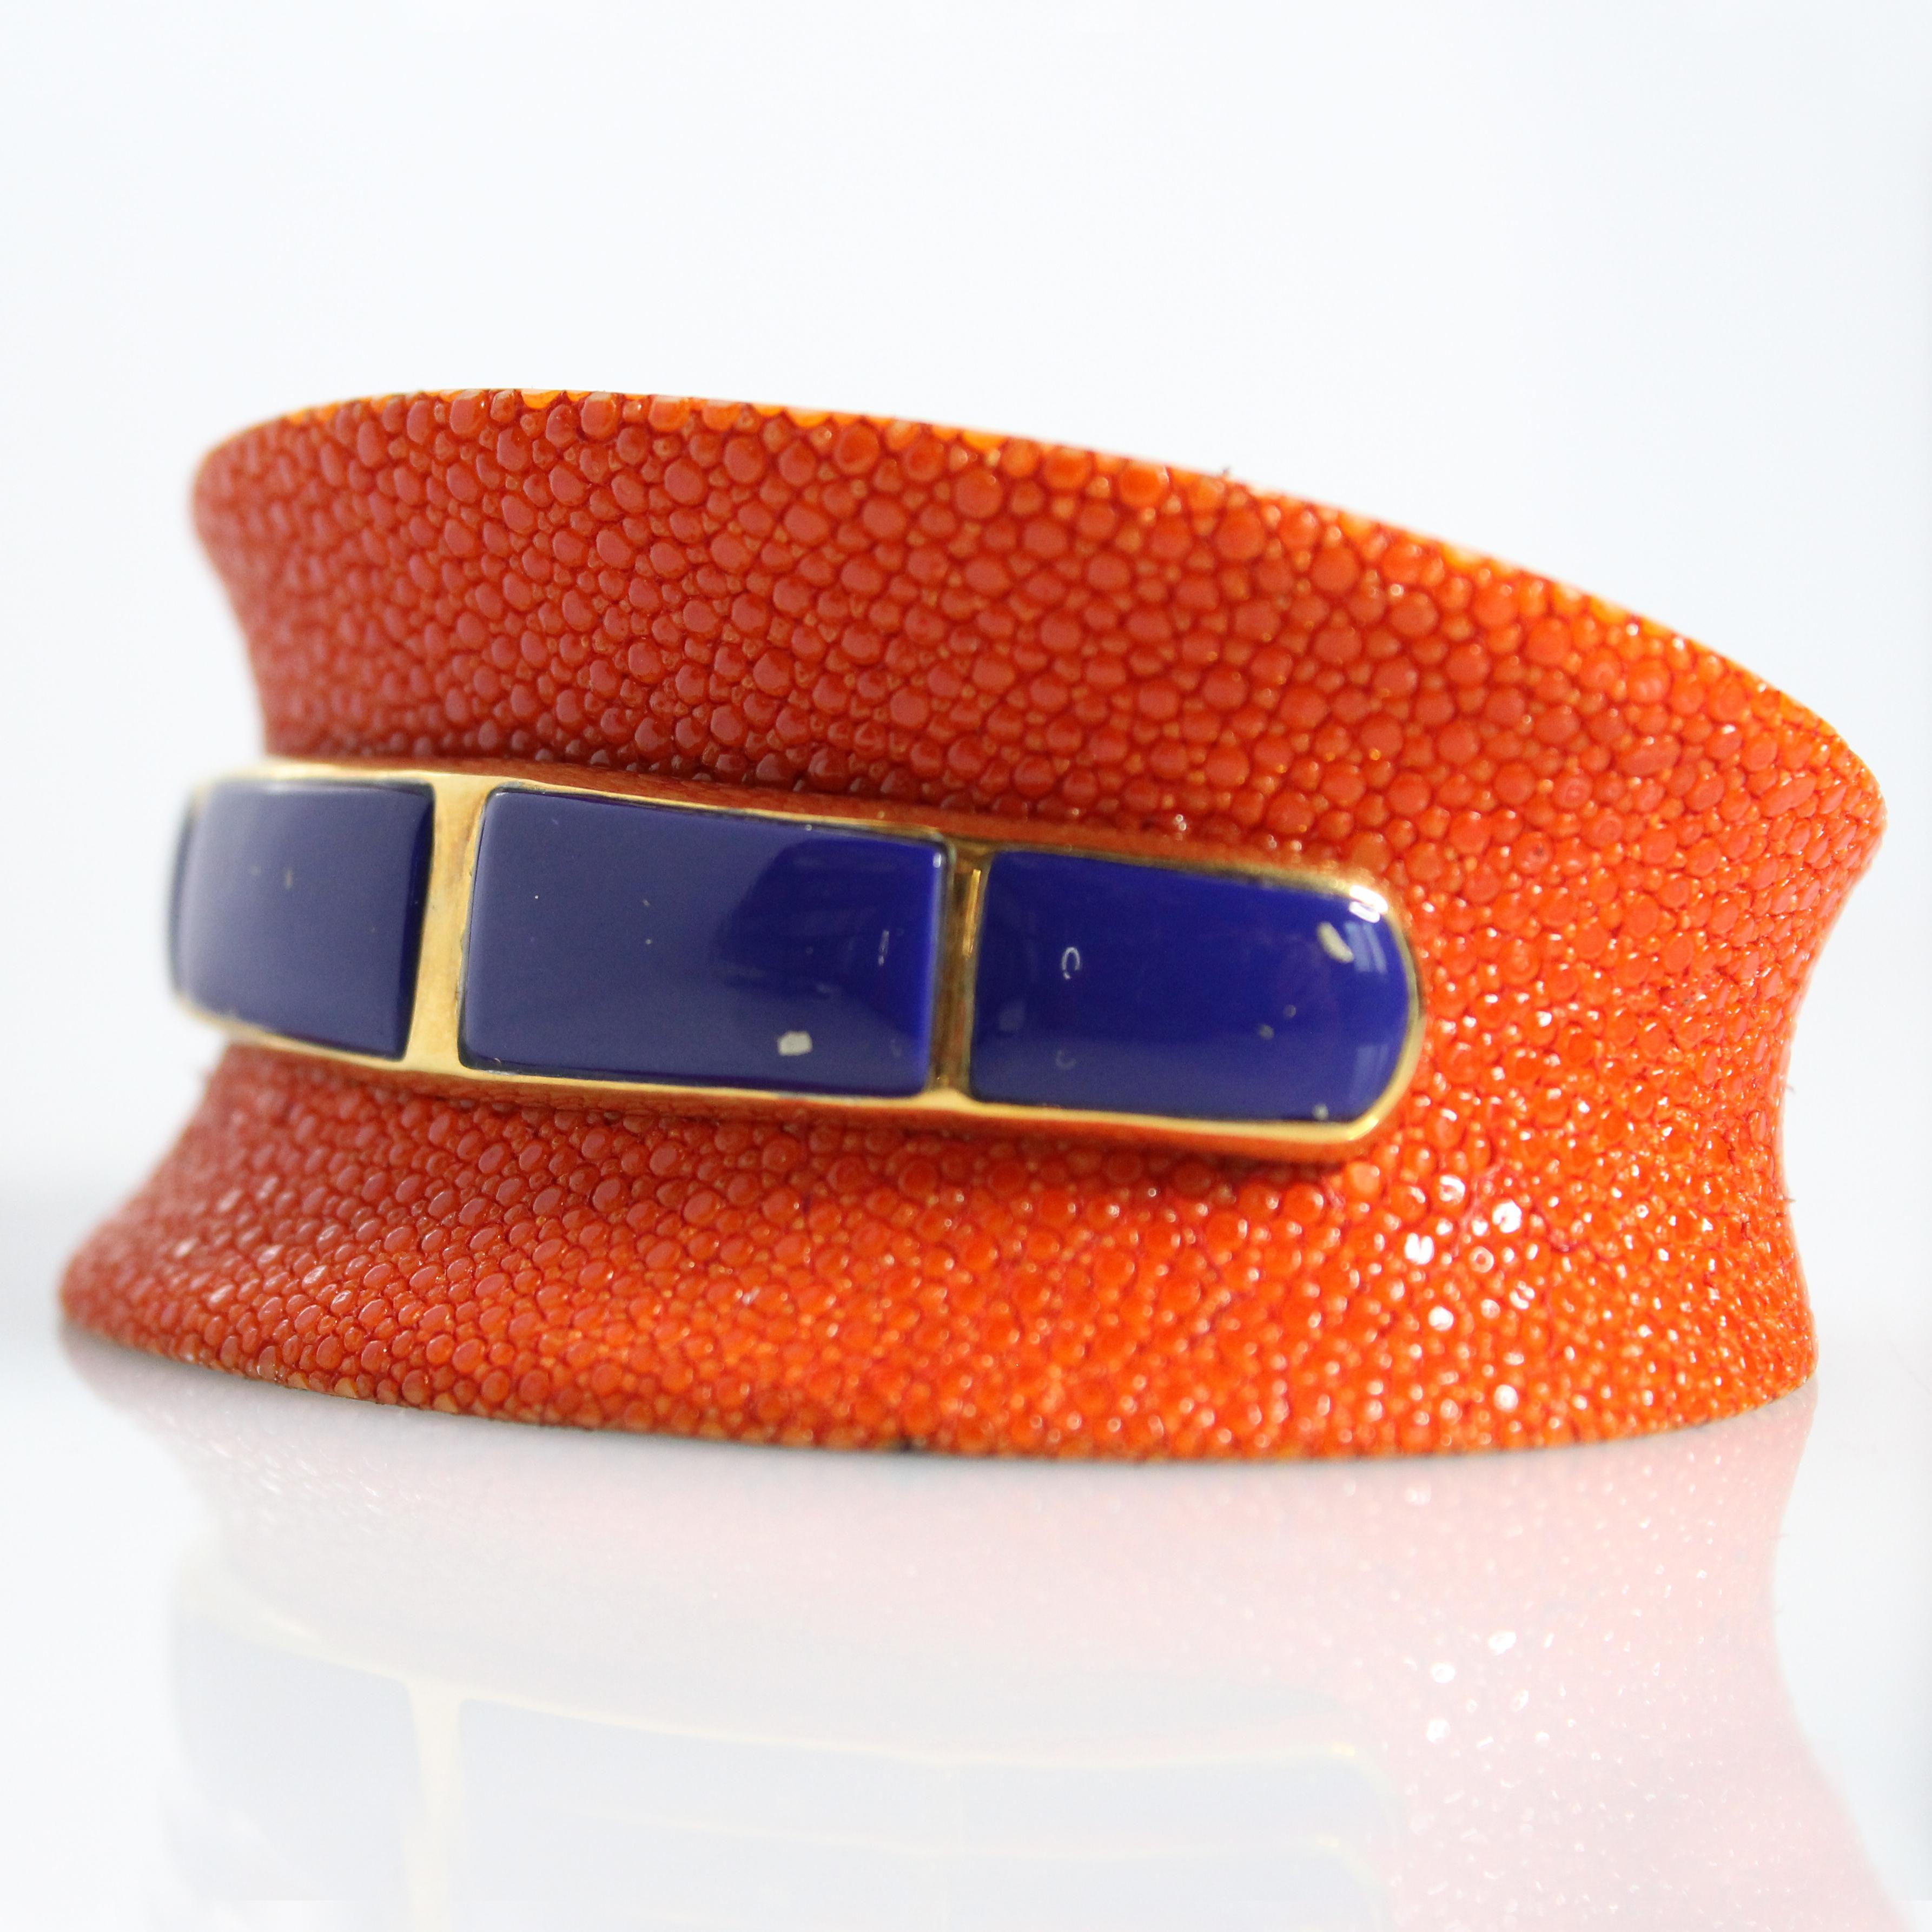 Bracelet made in wood covered by orange galuchat, embellished at the center with lapis lazuli mounted in sterling silver 925, 18 karat yellow gold-plated.

All AVGVSTA jewelry is new and has never been previously owned or worn. Each item will arrive